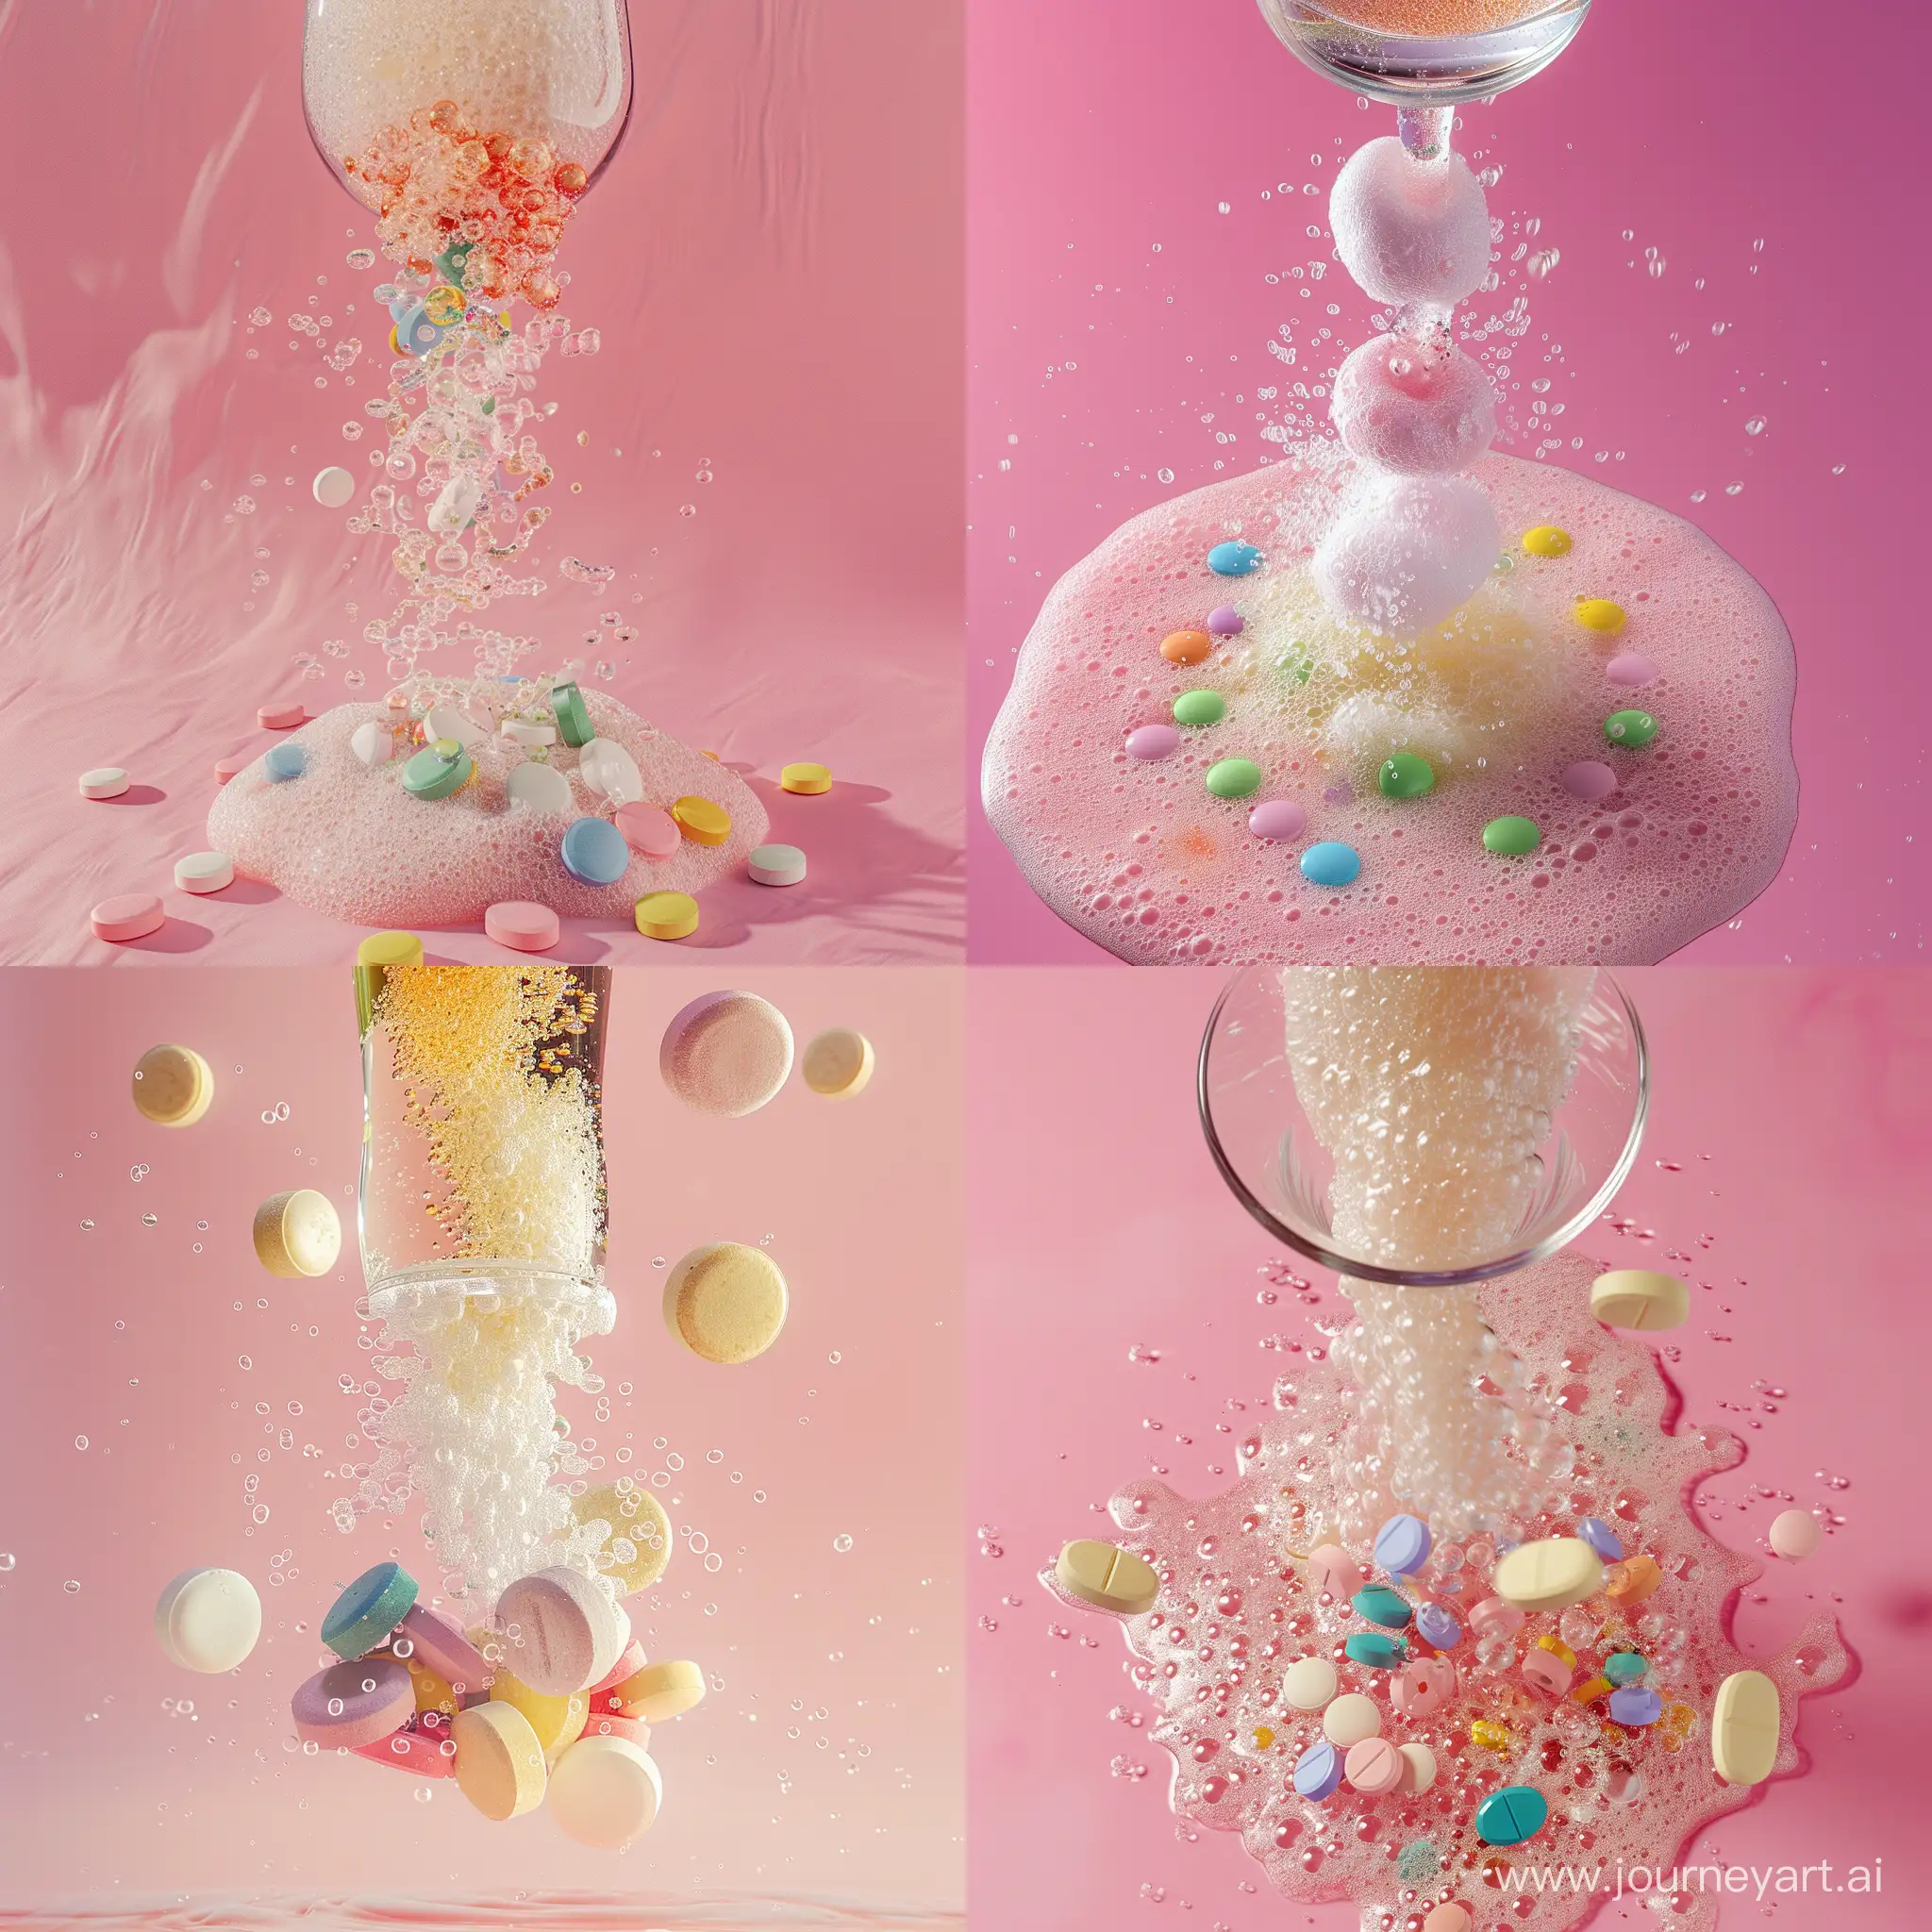 An overhead view of a clear glass filled with fizzy soda, suspended mid-air above a cluster of colorful effervescent tablets on a smooth, pink surface. The soda is cascading down from the glass, creating ripples in the liquid, as the tablets react and dissolve, releasing bubbles and foam against the pink backdrop.